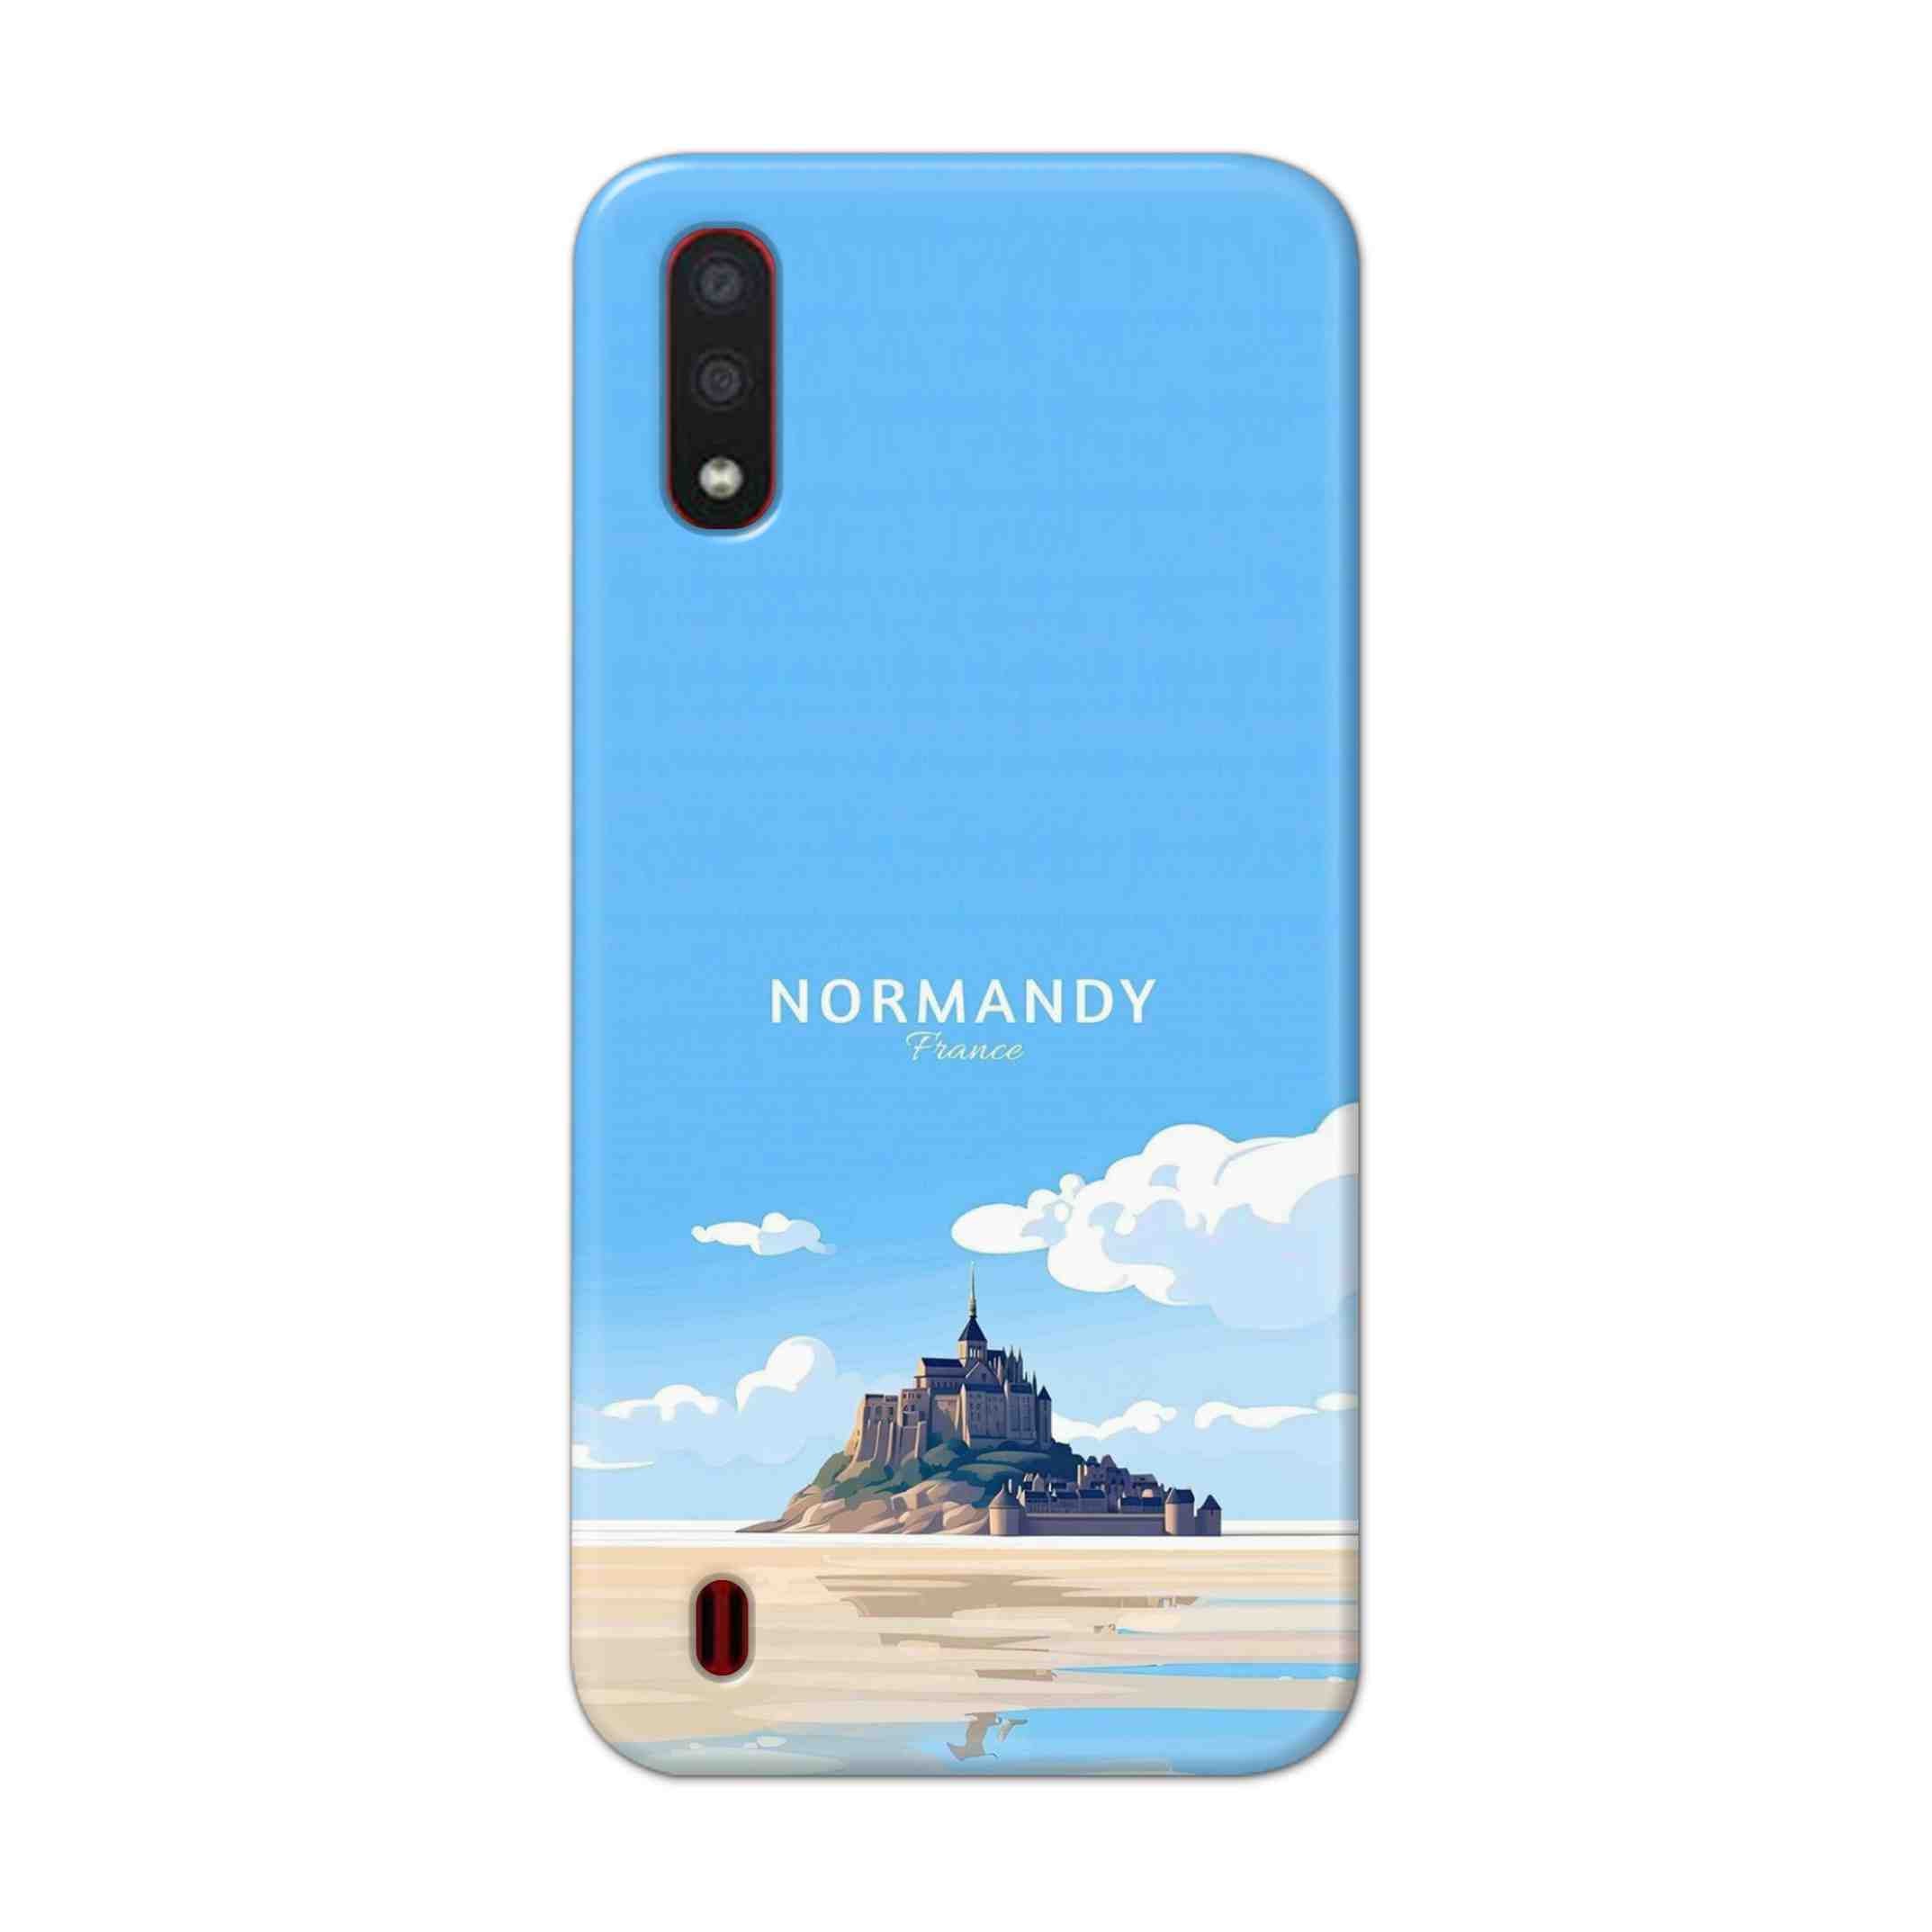 Buy Normandy Hard Back Mobile Phone Case/Cover For Samsung Galaxy M01 Online